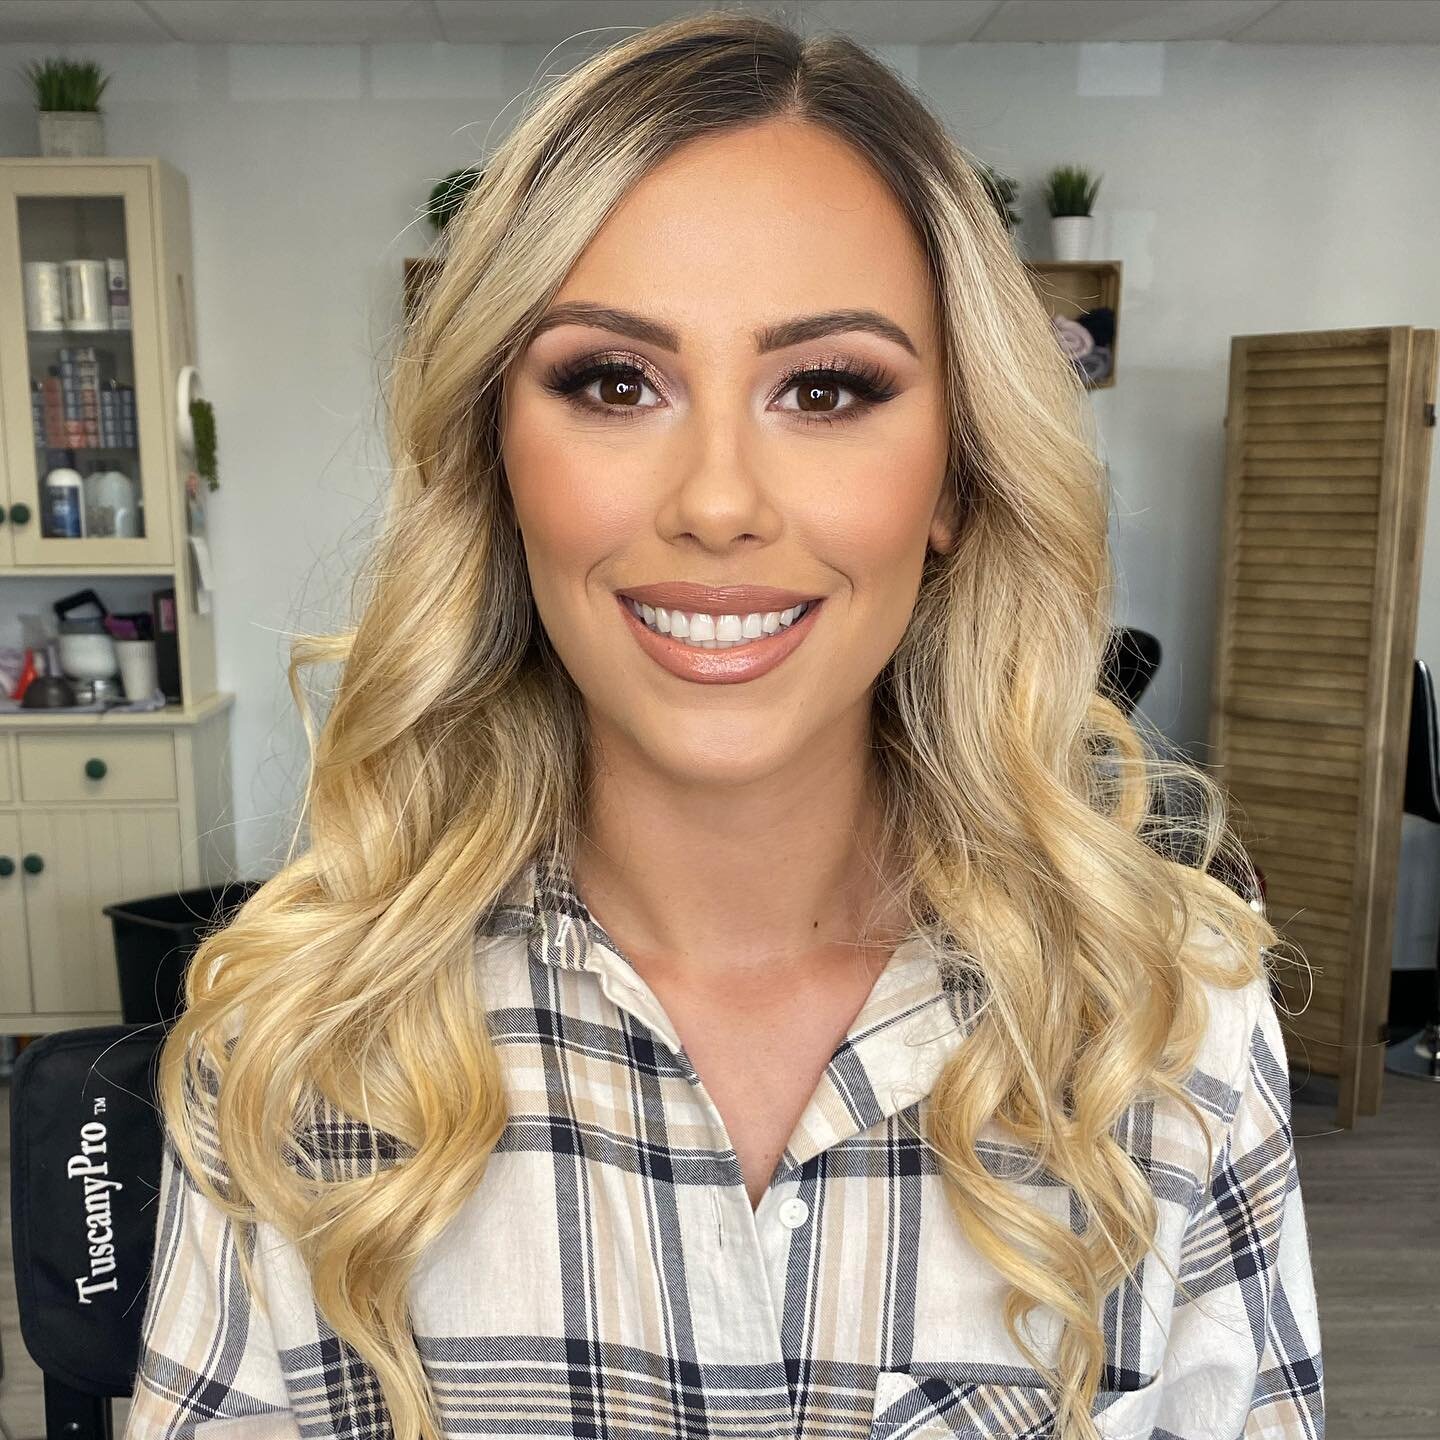 Yesterday&rsquo;s bridal trial was an absolute dream ☺️ I love when clients are just as excited as I am to meet and talk all about their weddings! Can&rsquo;t wait to glam you again @liliachristinaa ✨
.
.
.
.
.
.
#sandiegomakeupartist #sdmakeupartist